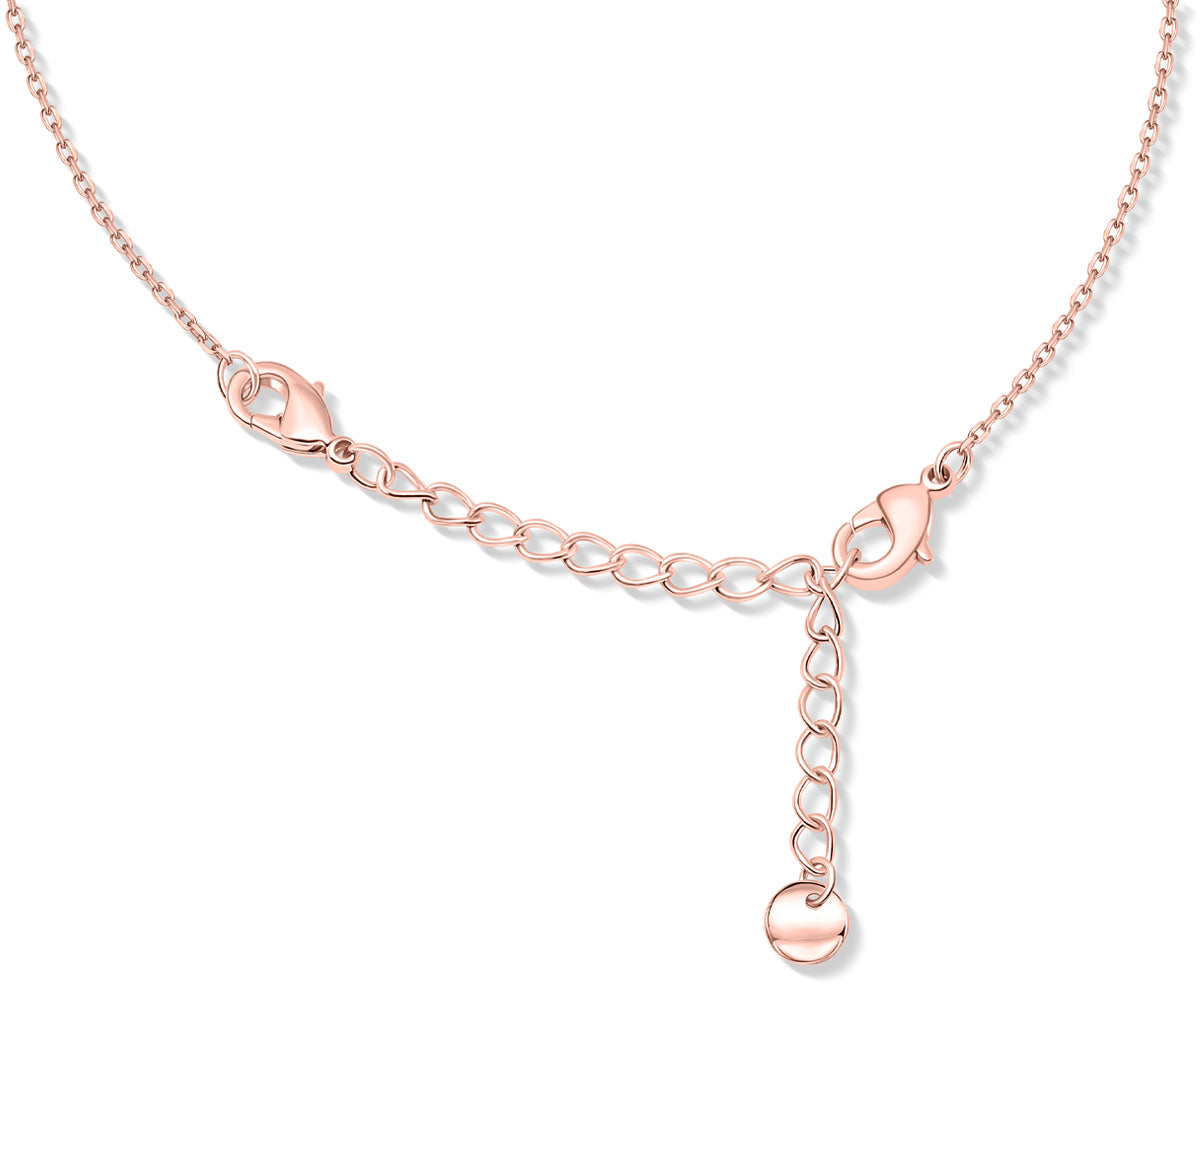 Rose gold plated necklace extender